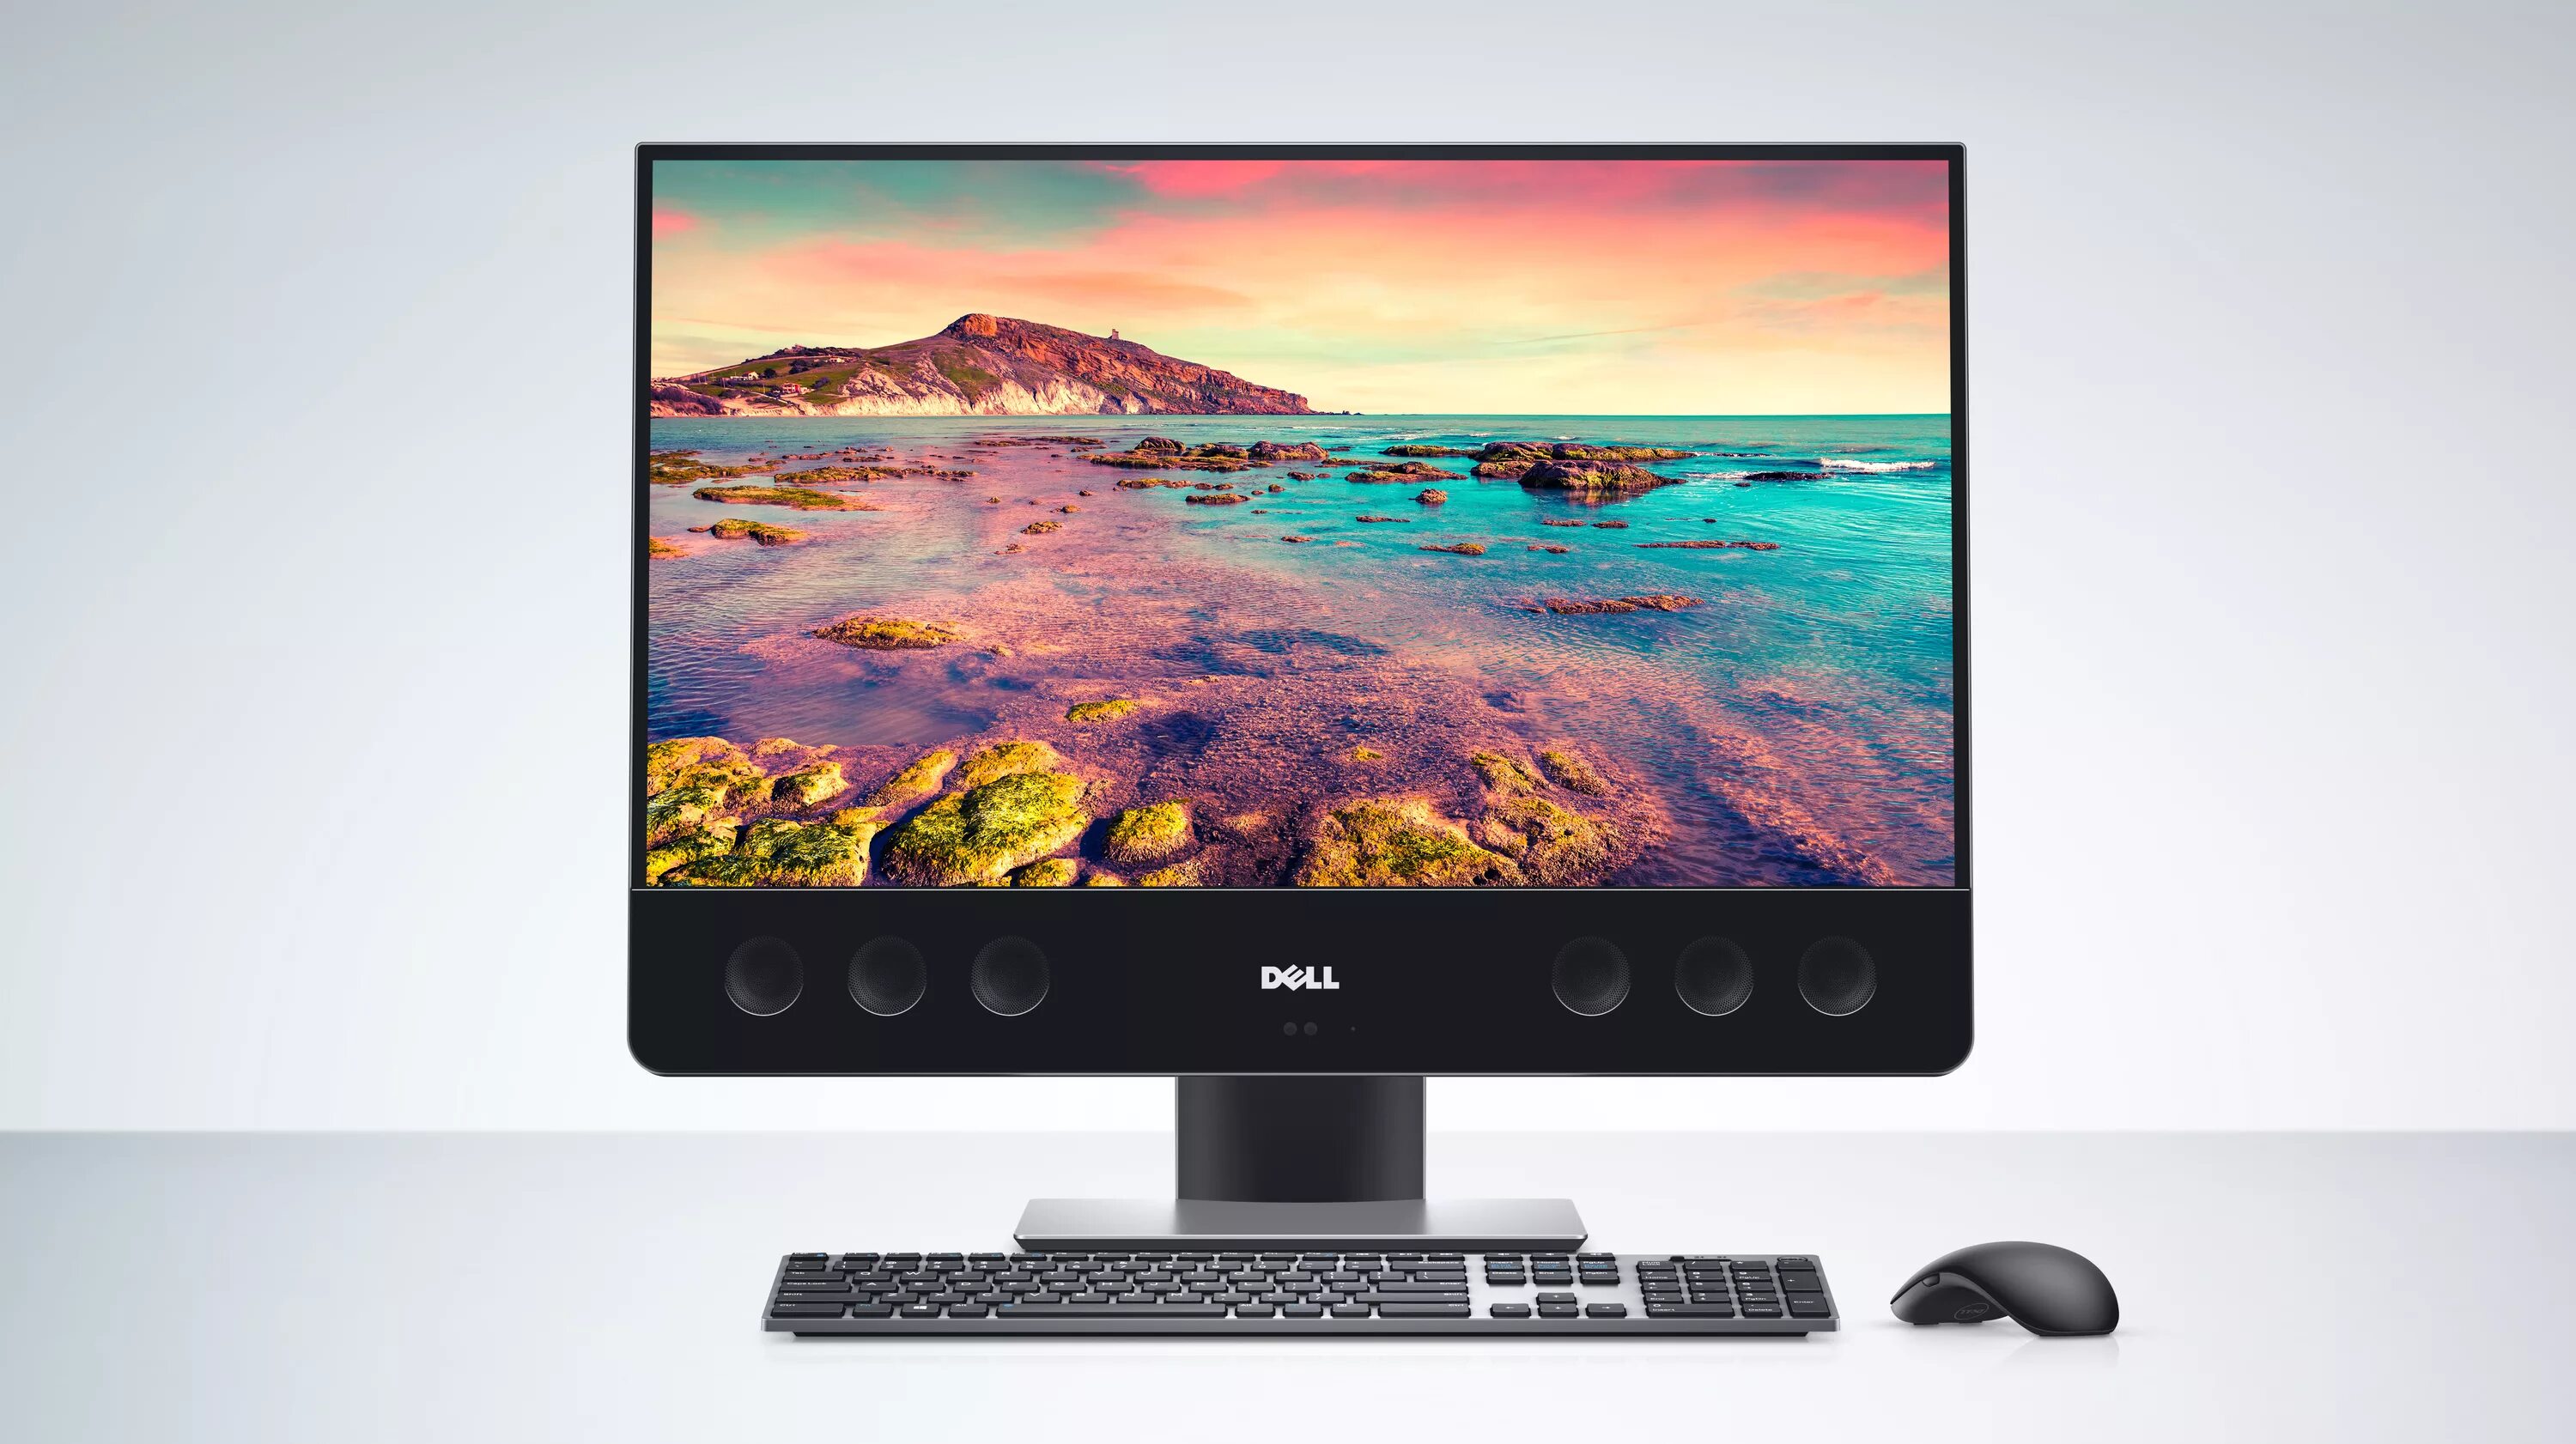 Разрешение моноблока. Моноблок Делл 27 дюймов. Моноблок dell AIO. Dell XPS 27 all-in-one. Моноблок dell 2017.